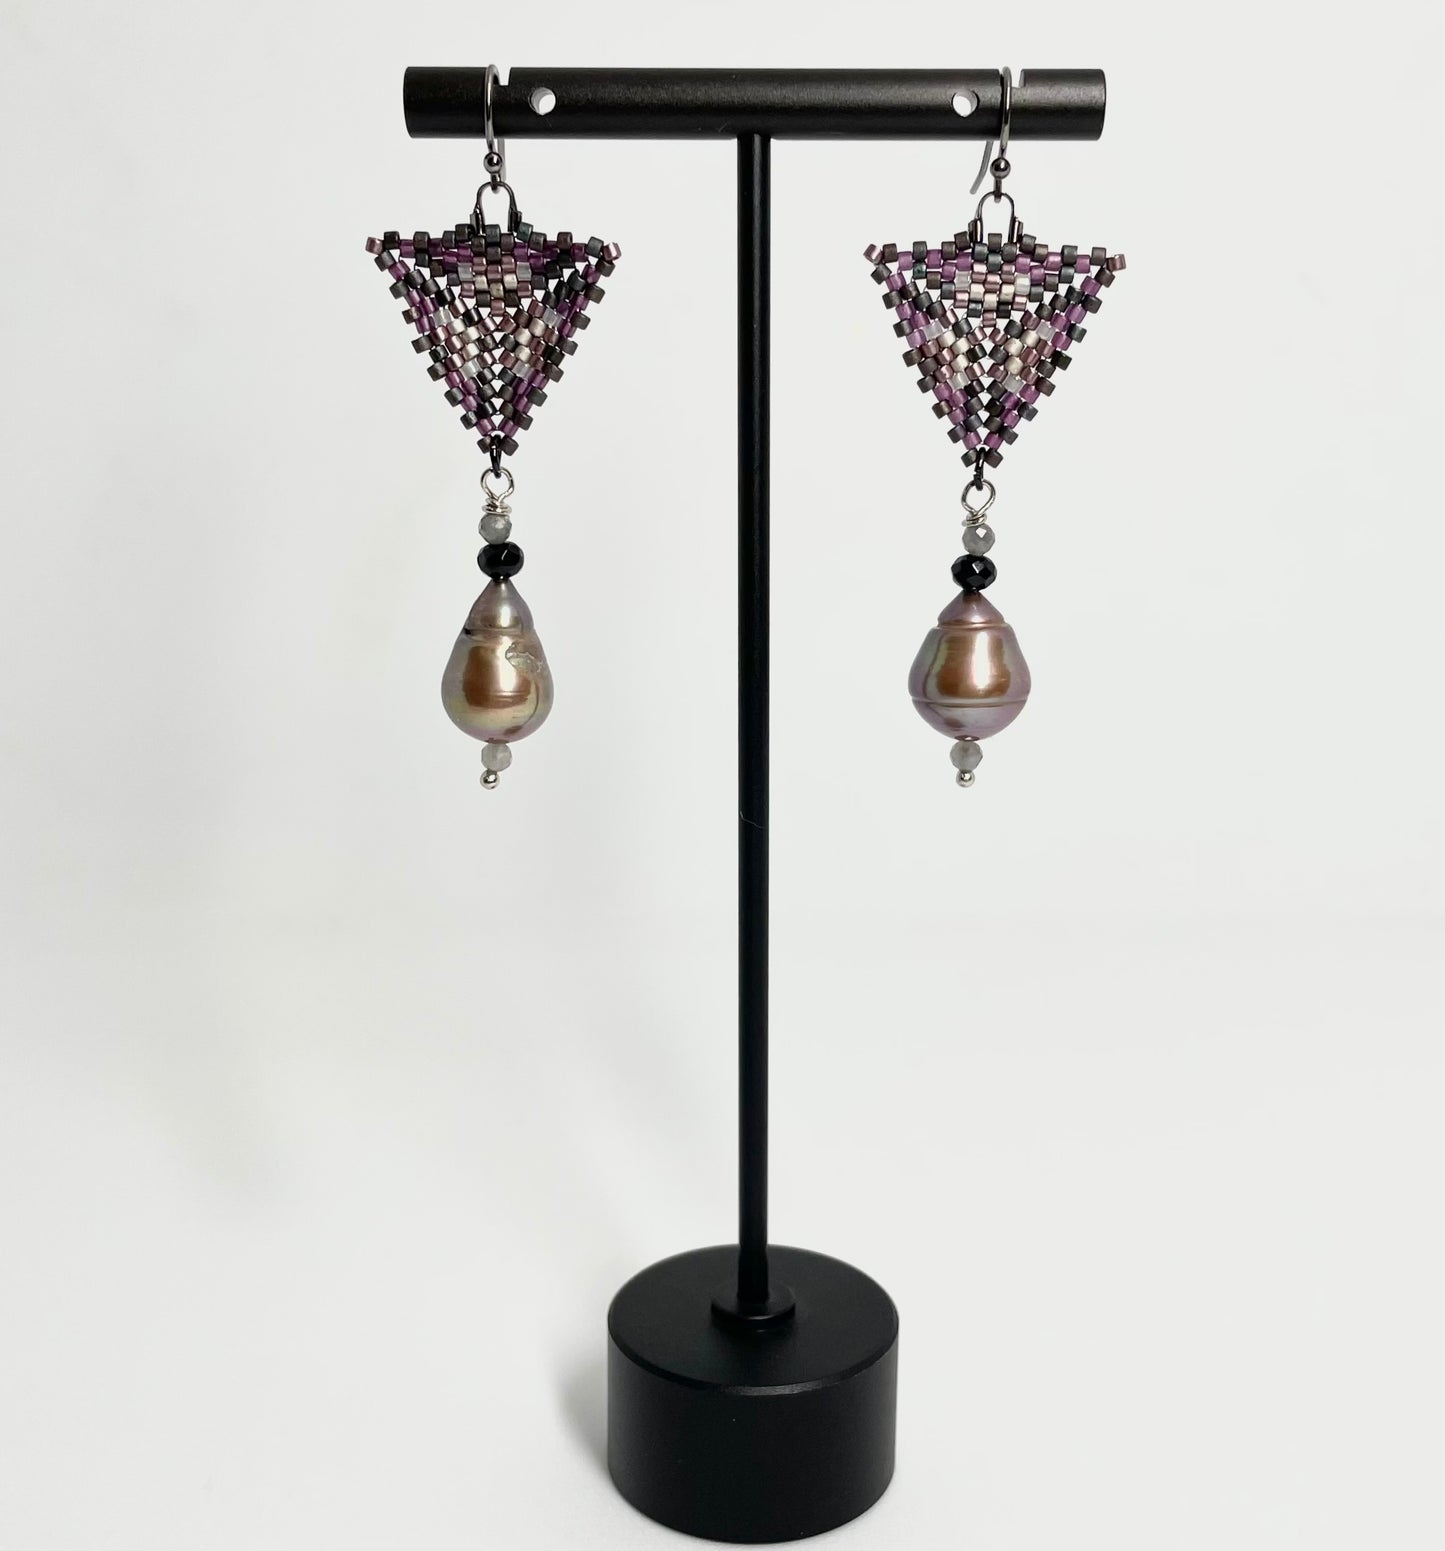 Beaded triangle earrings with pearl